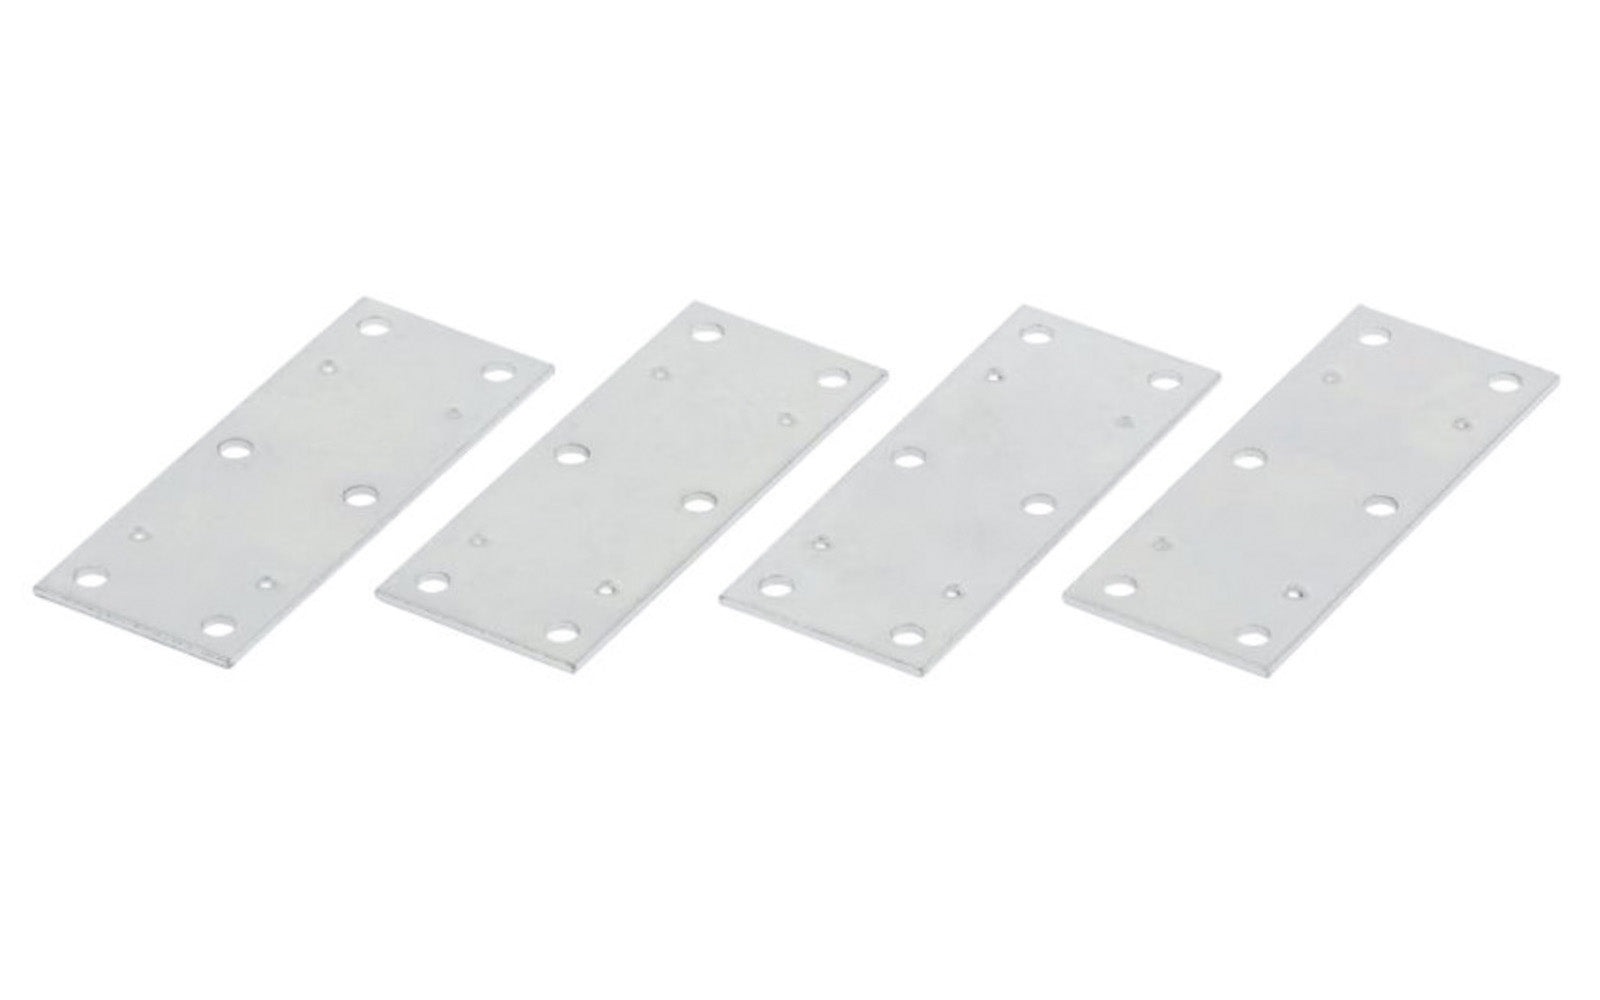 These 3-1/2" x 1-3/8" zinc plated mending plates are for reinforcing, attaching, connecting & splicing panels & industrial applications. Made of steel material with a zinc plating. 4 Pack. National Hardware Model N220-111. 038613220119. Plated to withstand weather conditions & prevent corrosion. 